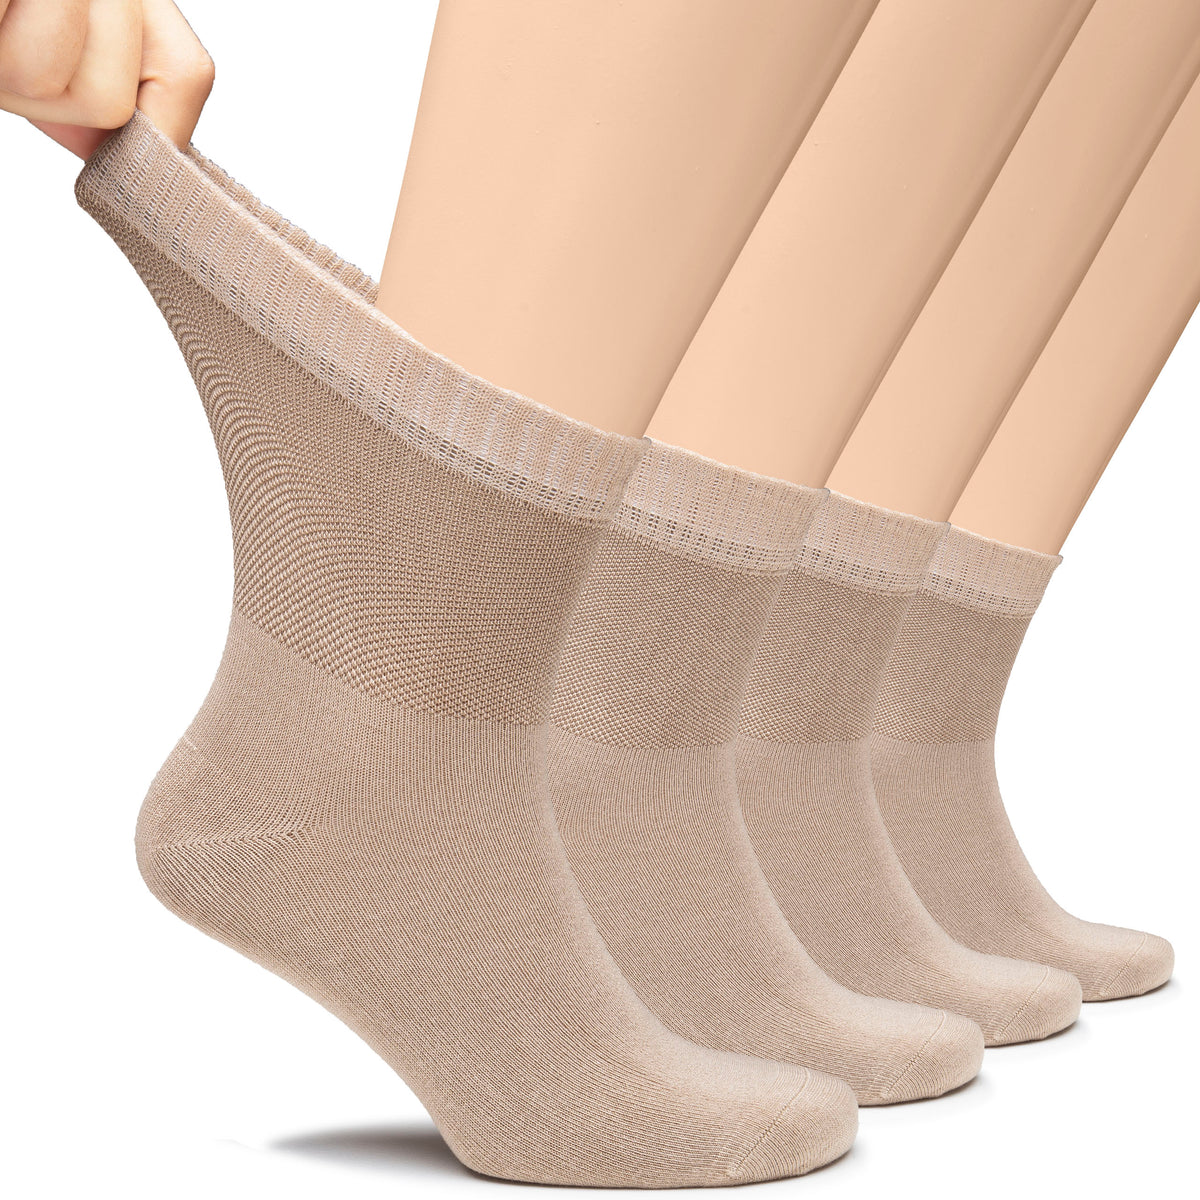 A man's feet are shown wearing one of two pairs of Men's Bamboo Diabetic Socks, arranged in a row.